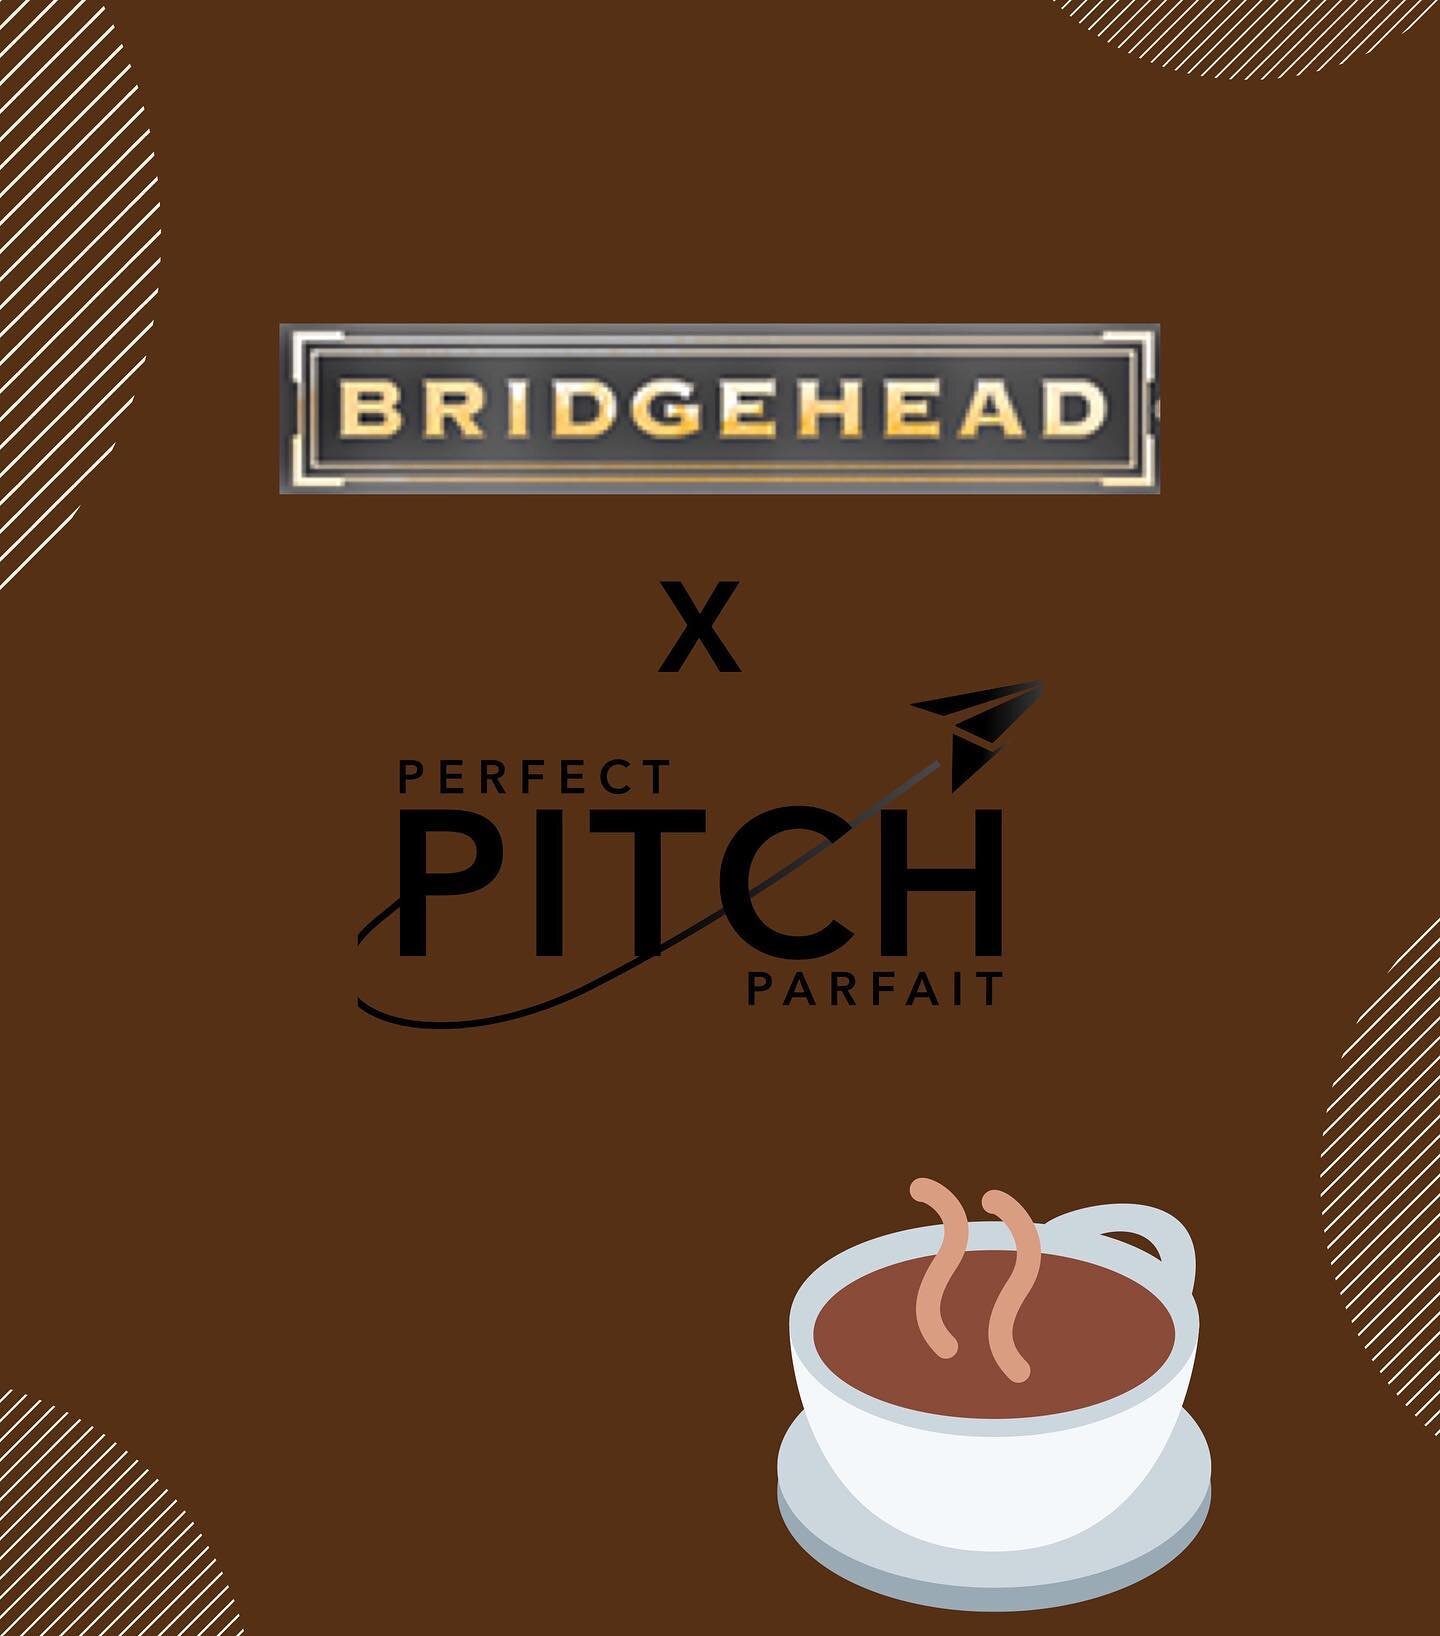 Get ready to fuel all your caffeine needs! ☕️FLY is proud to announce that Perfect Pitch is partnering with Bridgehead for Perfect Pitch 2020. ⠀⠀
You don&rsquo;t want to miss out on Perfect Pitch . The theme for this year&rsquo;s event is &ldquo;Entr